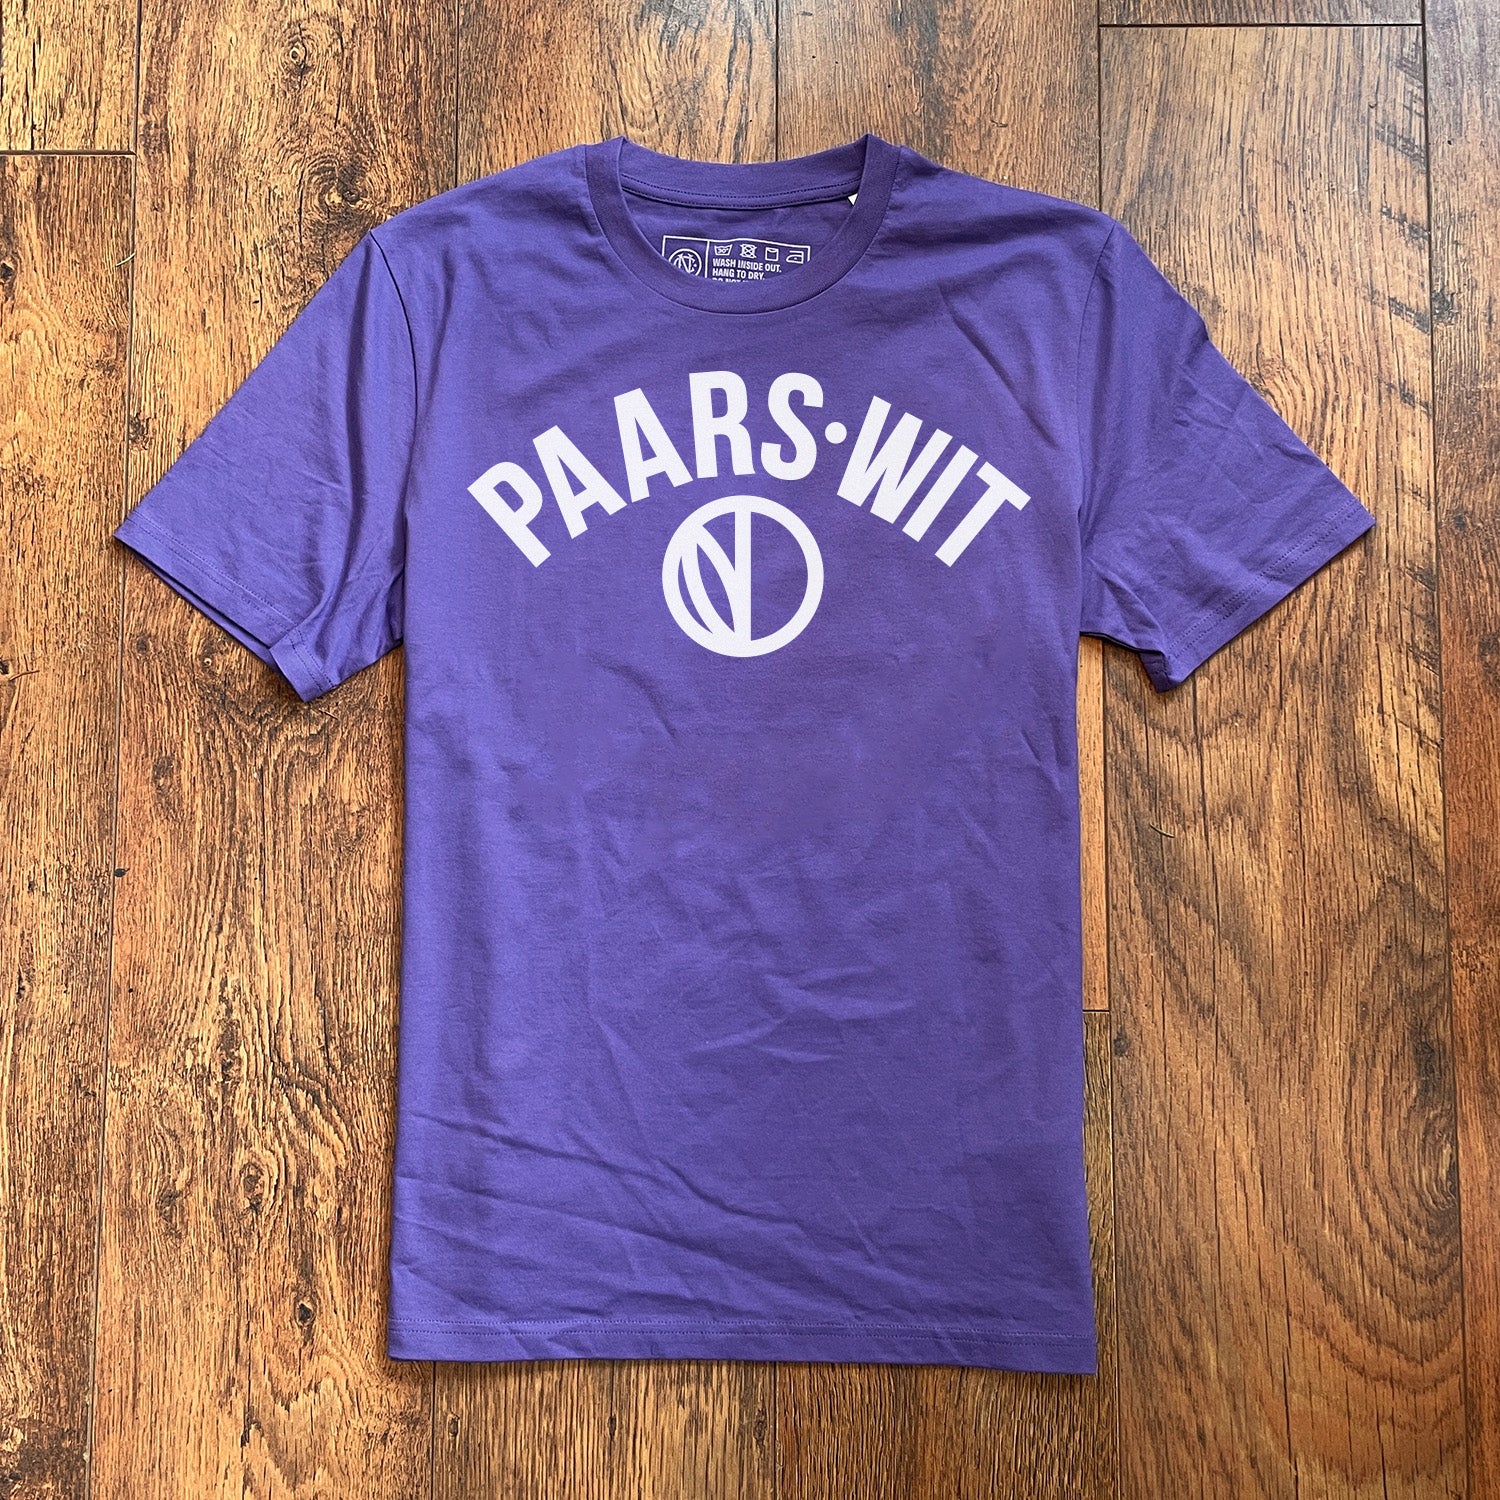 Paars Wit 1979 T-shirt